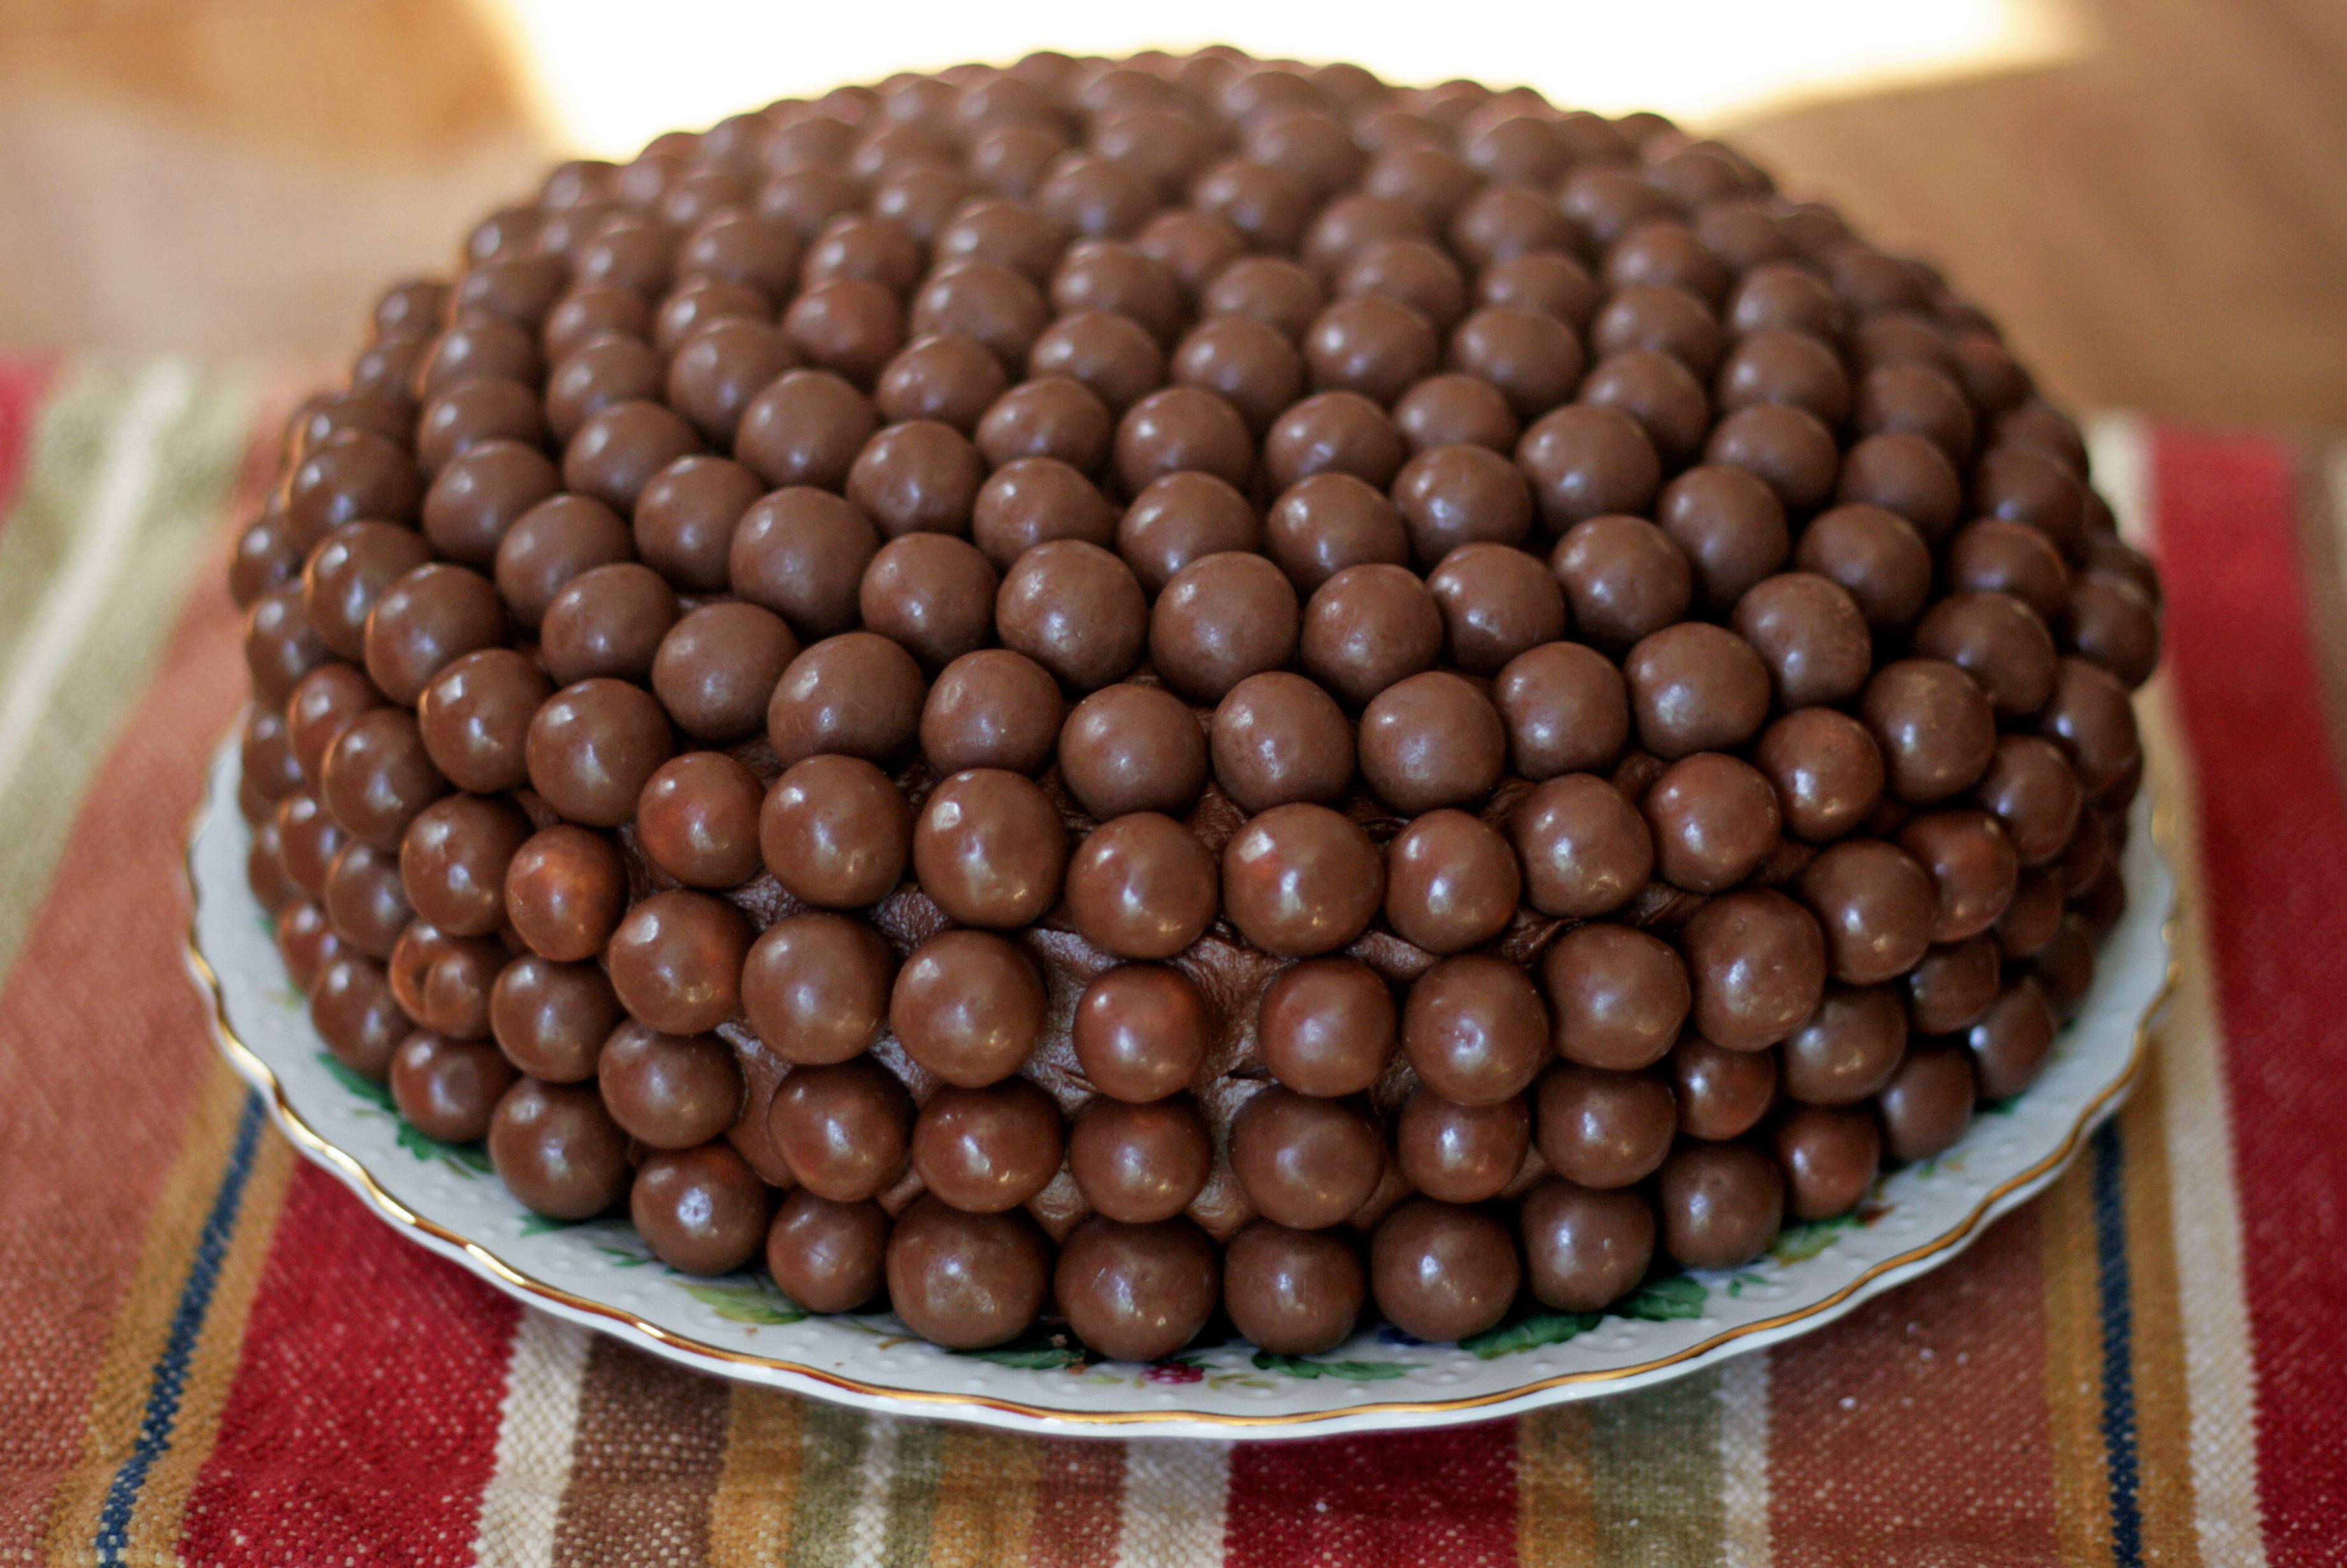 Chocolate Cake with Whoppers Candy